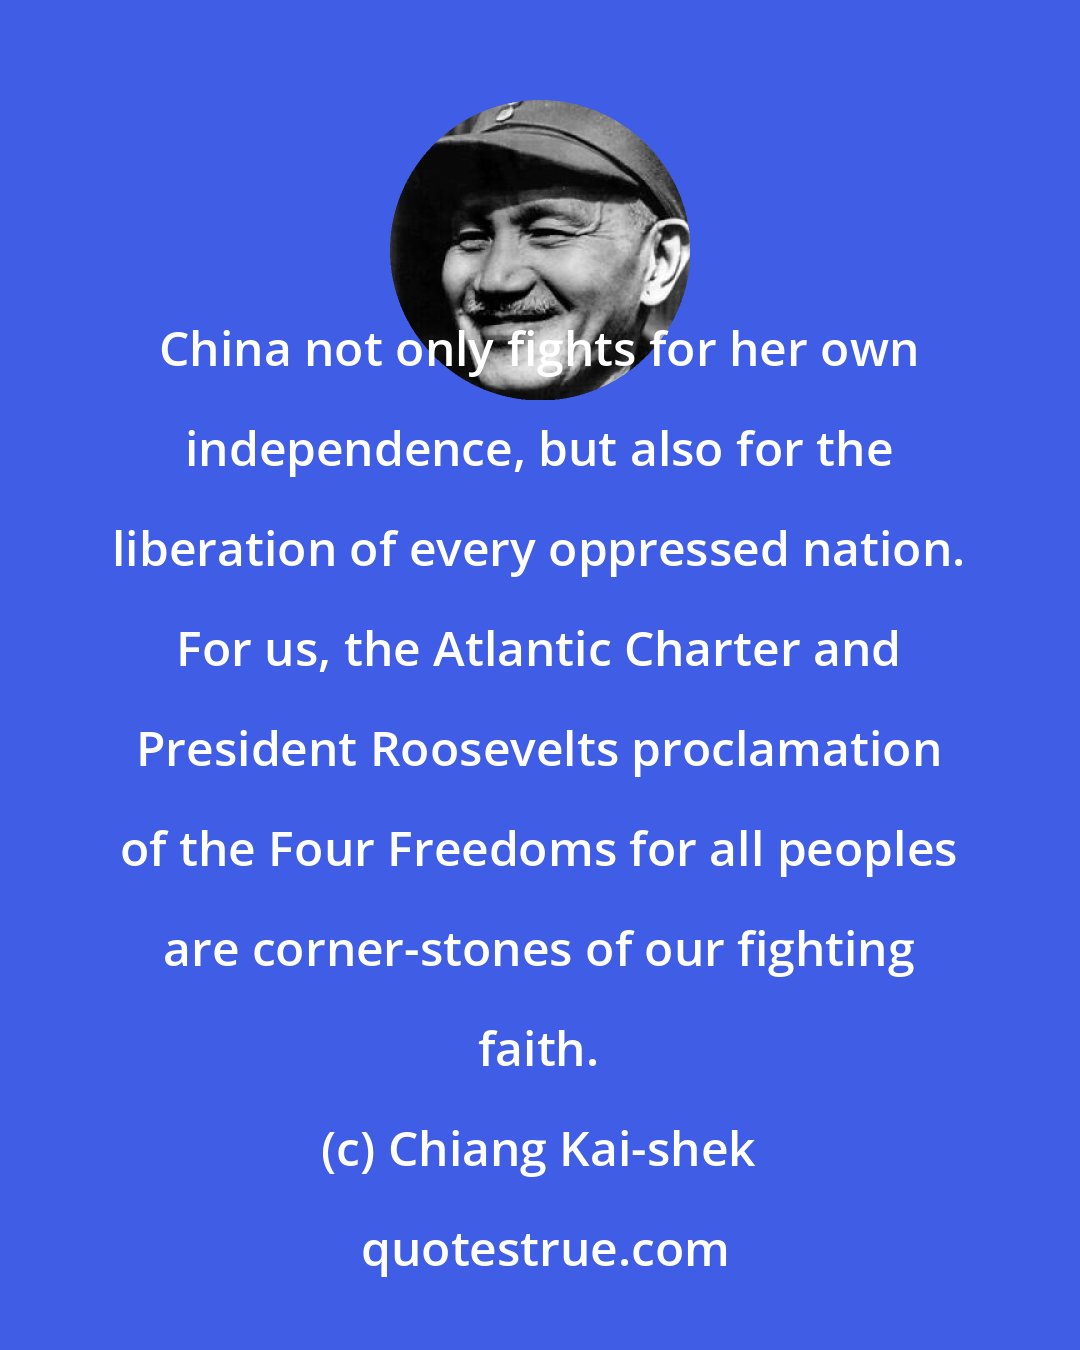 Chiang Kai-shek: China not only fights for her own independence, but also for the liberation of every oppressed nation. For us, the Atlantic Charter and President Roosevelts proclamation of the Four Freedoms for all peoples are corner-stones of our fighting faith.